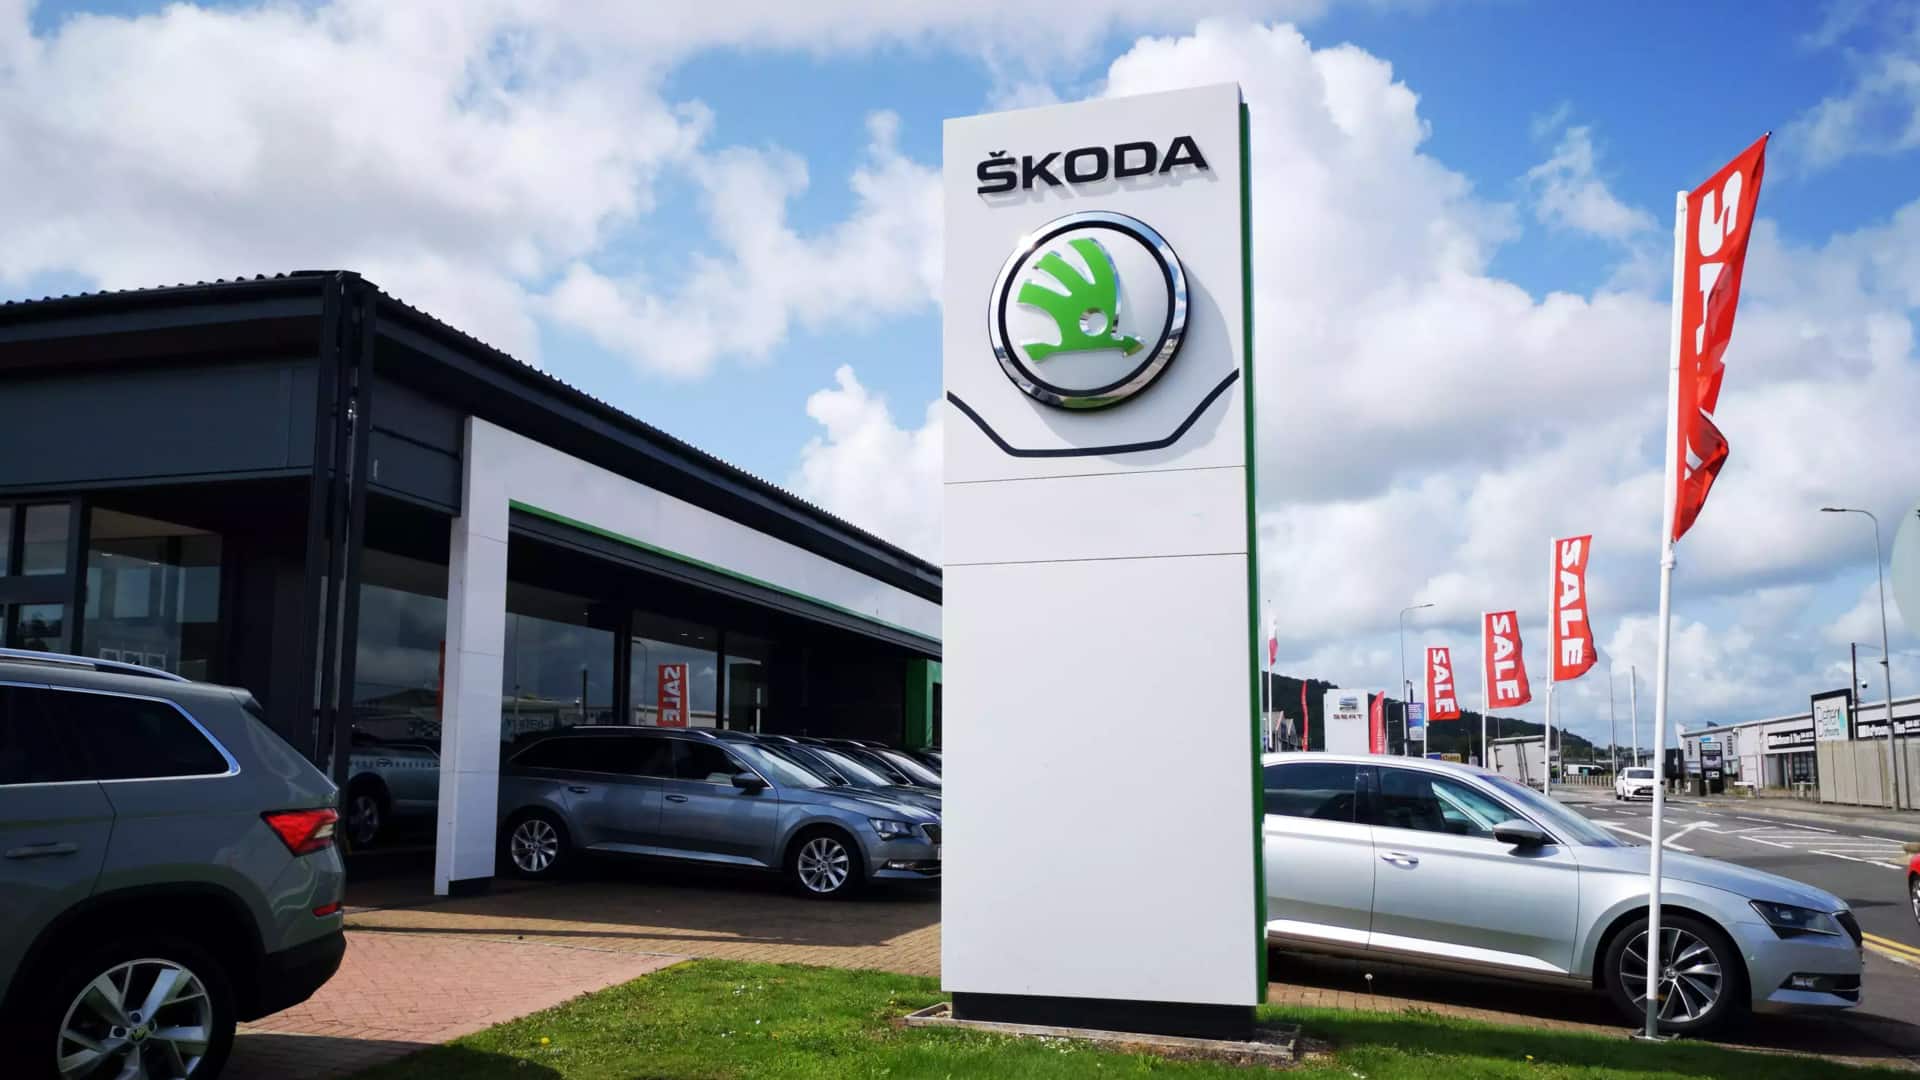 SKODA plans expansion in India with new models, local partnerships